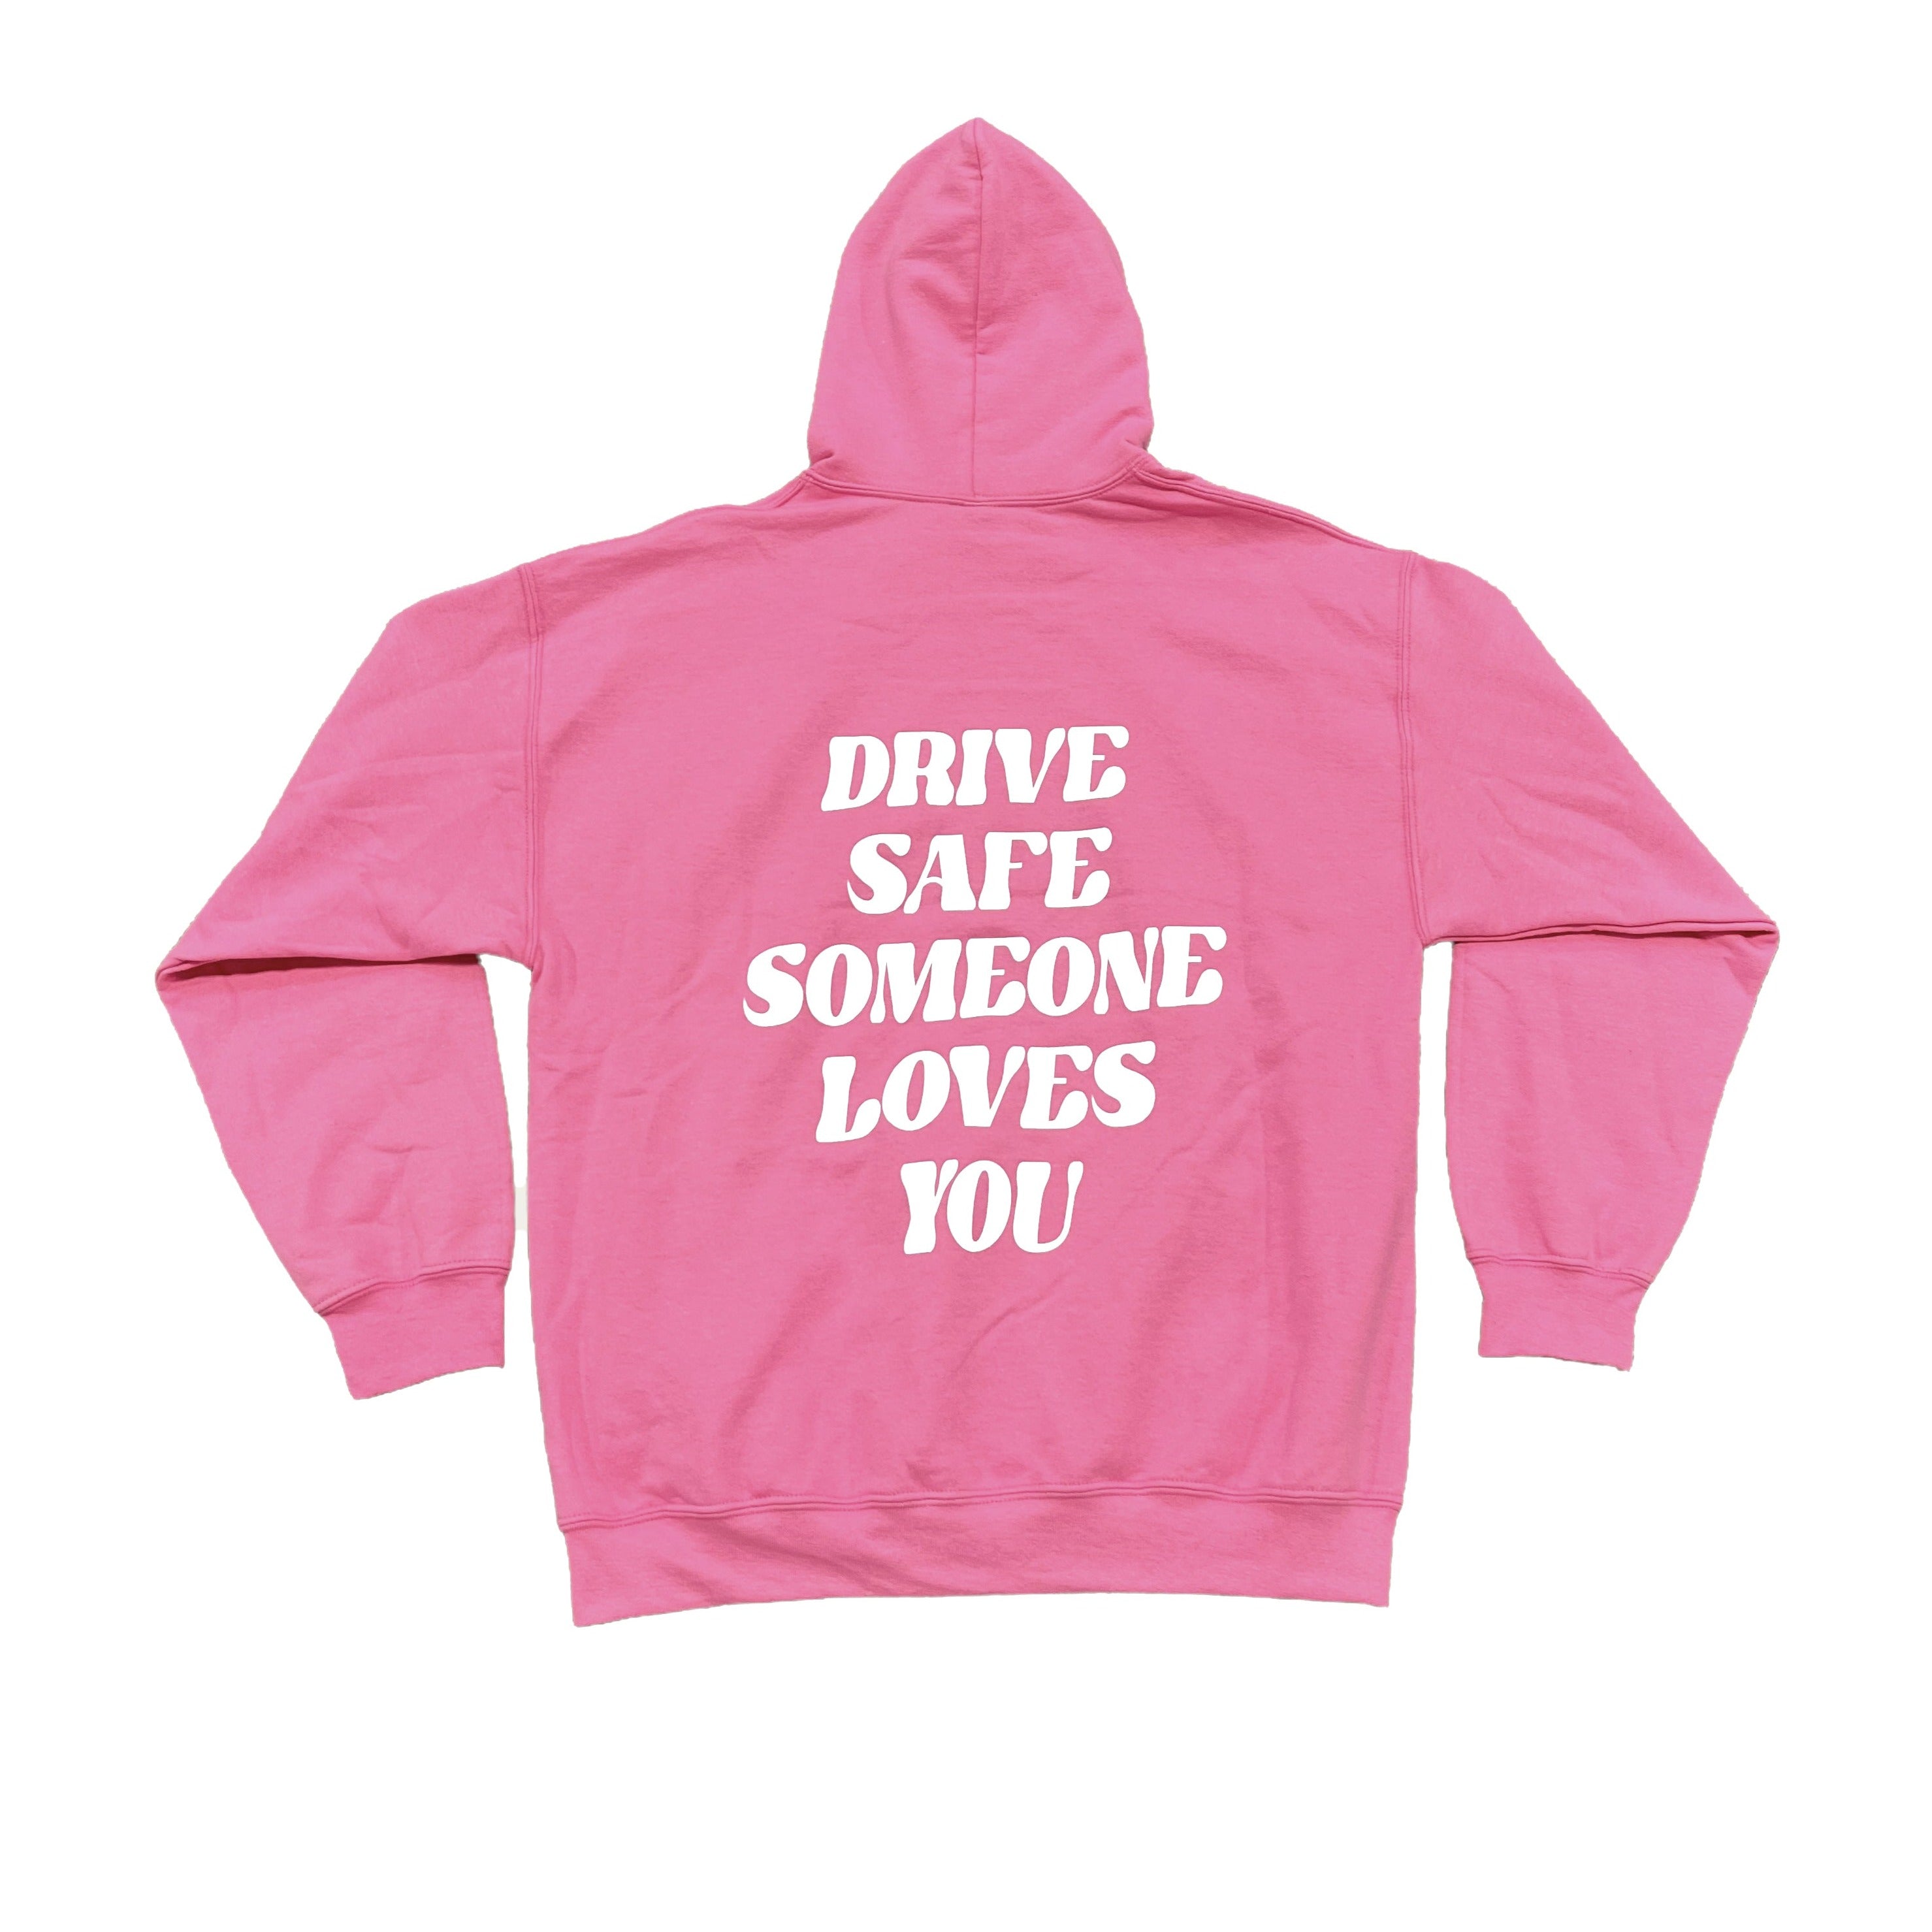 Share Love Hoodie in Pink with Blue Heart